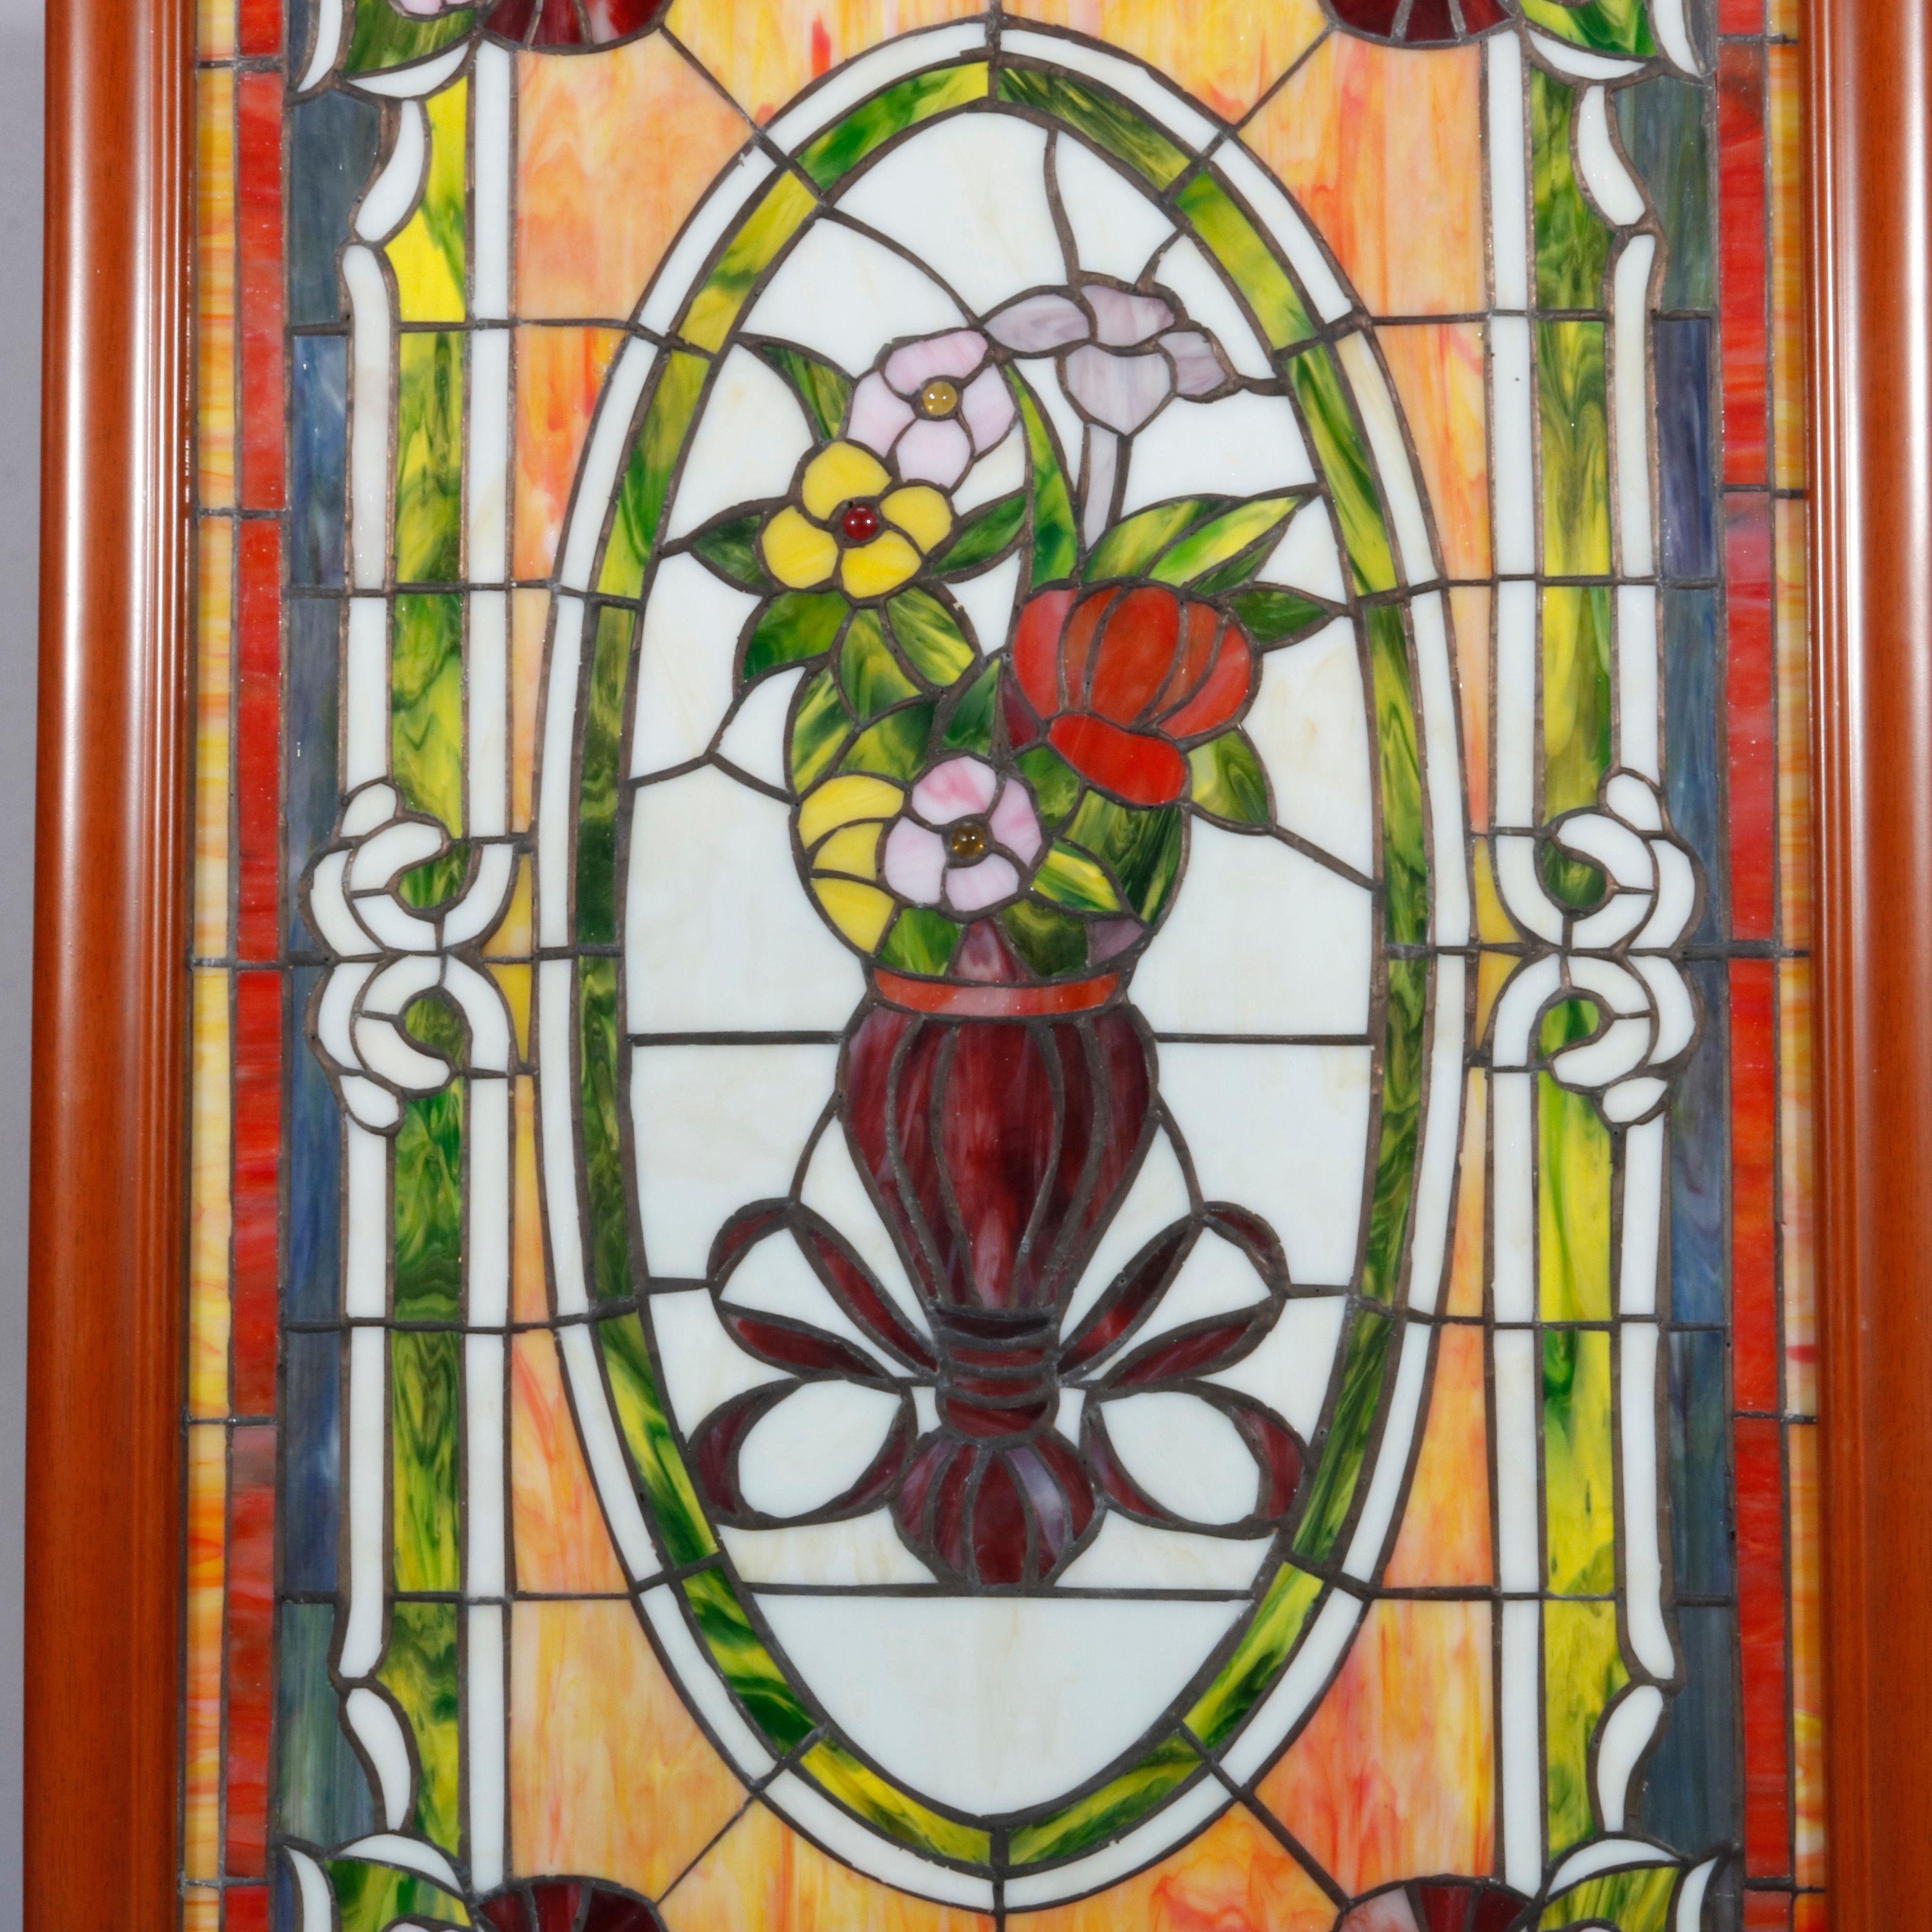 A vintage leaded stained and slag glass window offers central medallion with floral bouquet, seated in wood frame, 20th century

Measures: 36.75